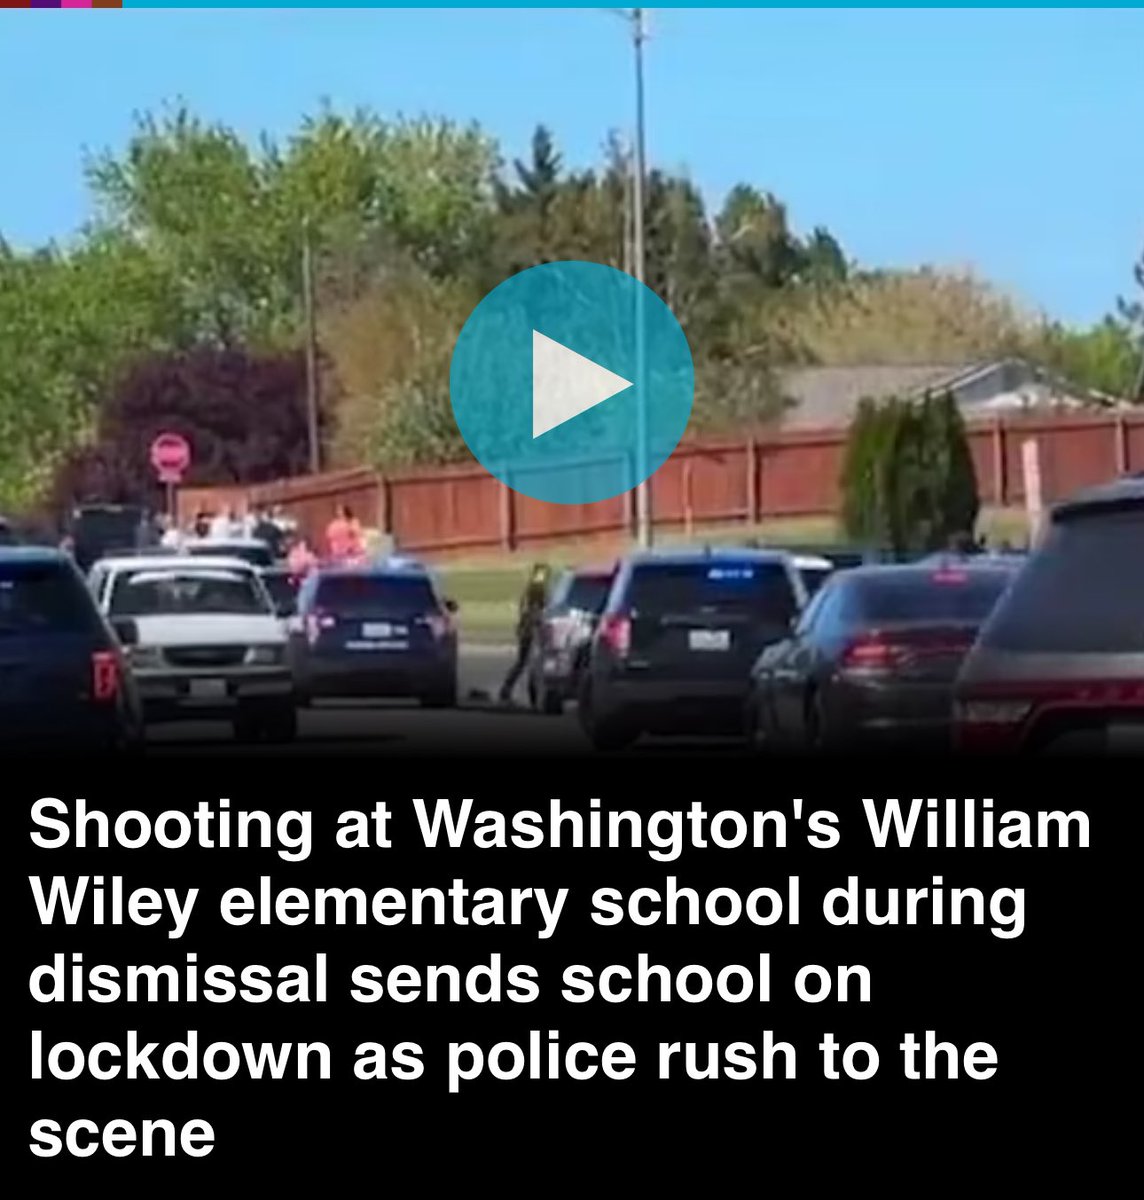 'During dismissal today, there was a shooting at William Wiley Elementary School in West Richland, WA. The perpetrator is still at large. Schools placed in critical lockdown. We will send updates.'